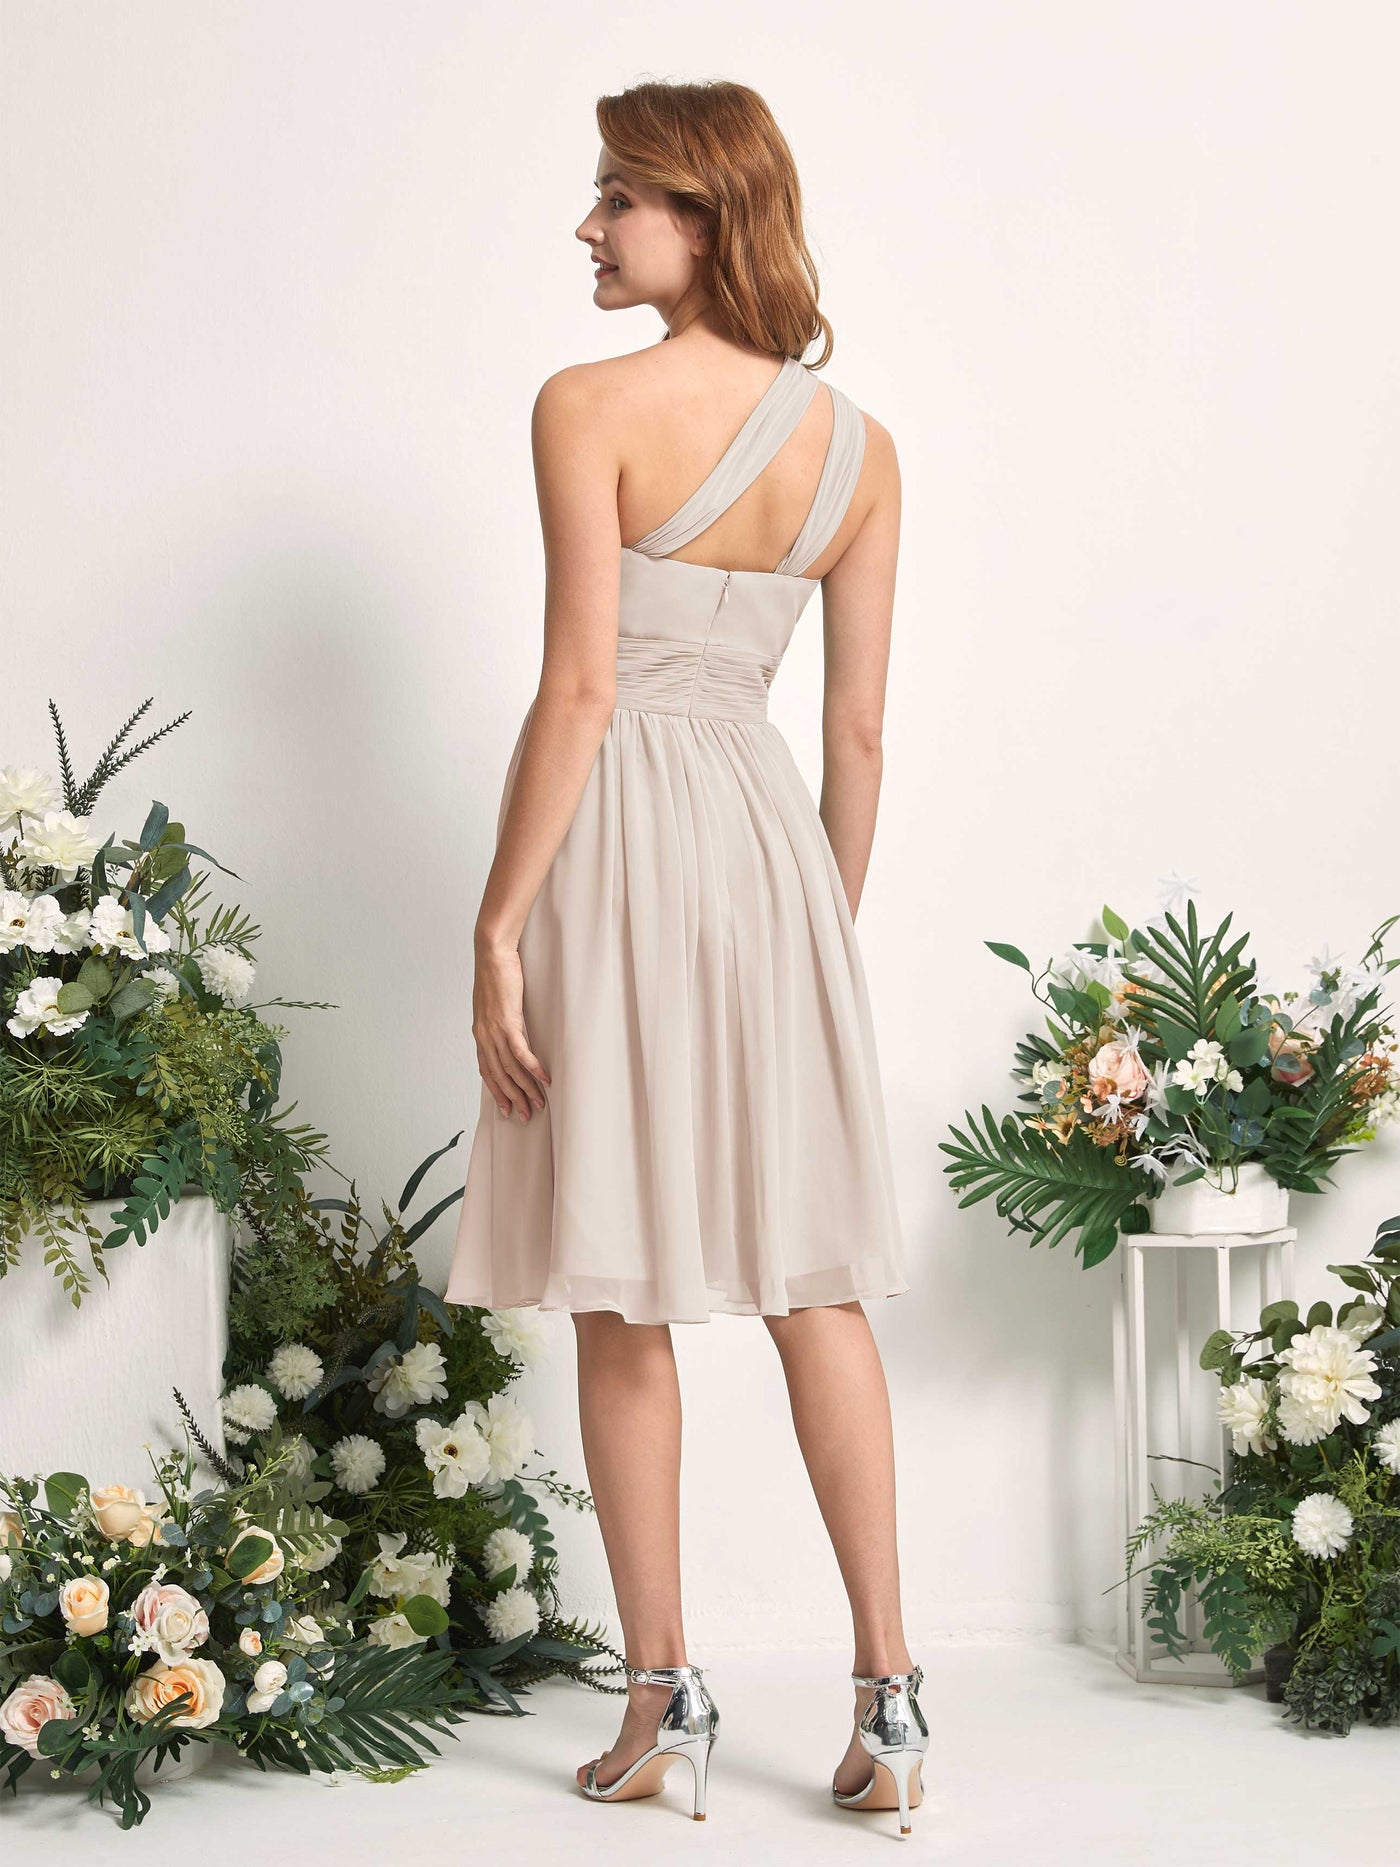 Bridesmaid Dress A-line Chiffon One Shoulder Knee Length Sleeveless Wedding Party Dress - Champagne (81221216)#color_champagne